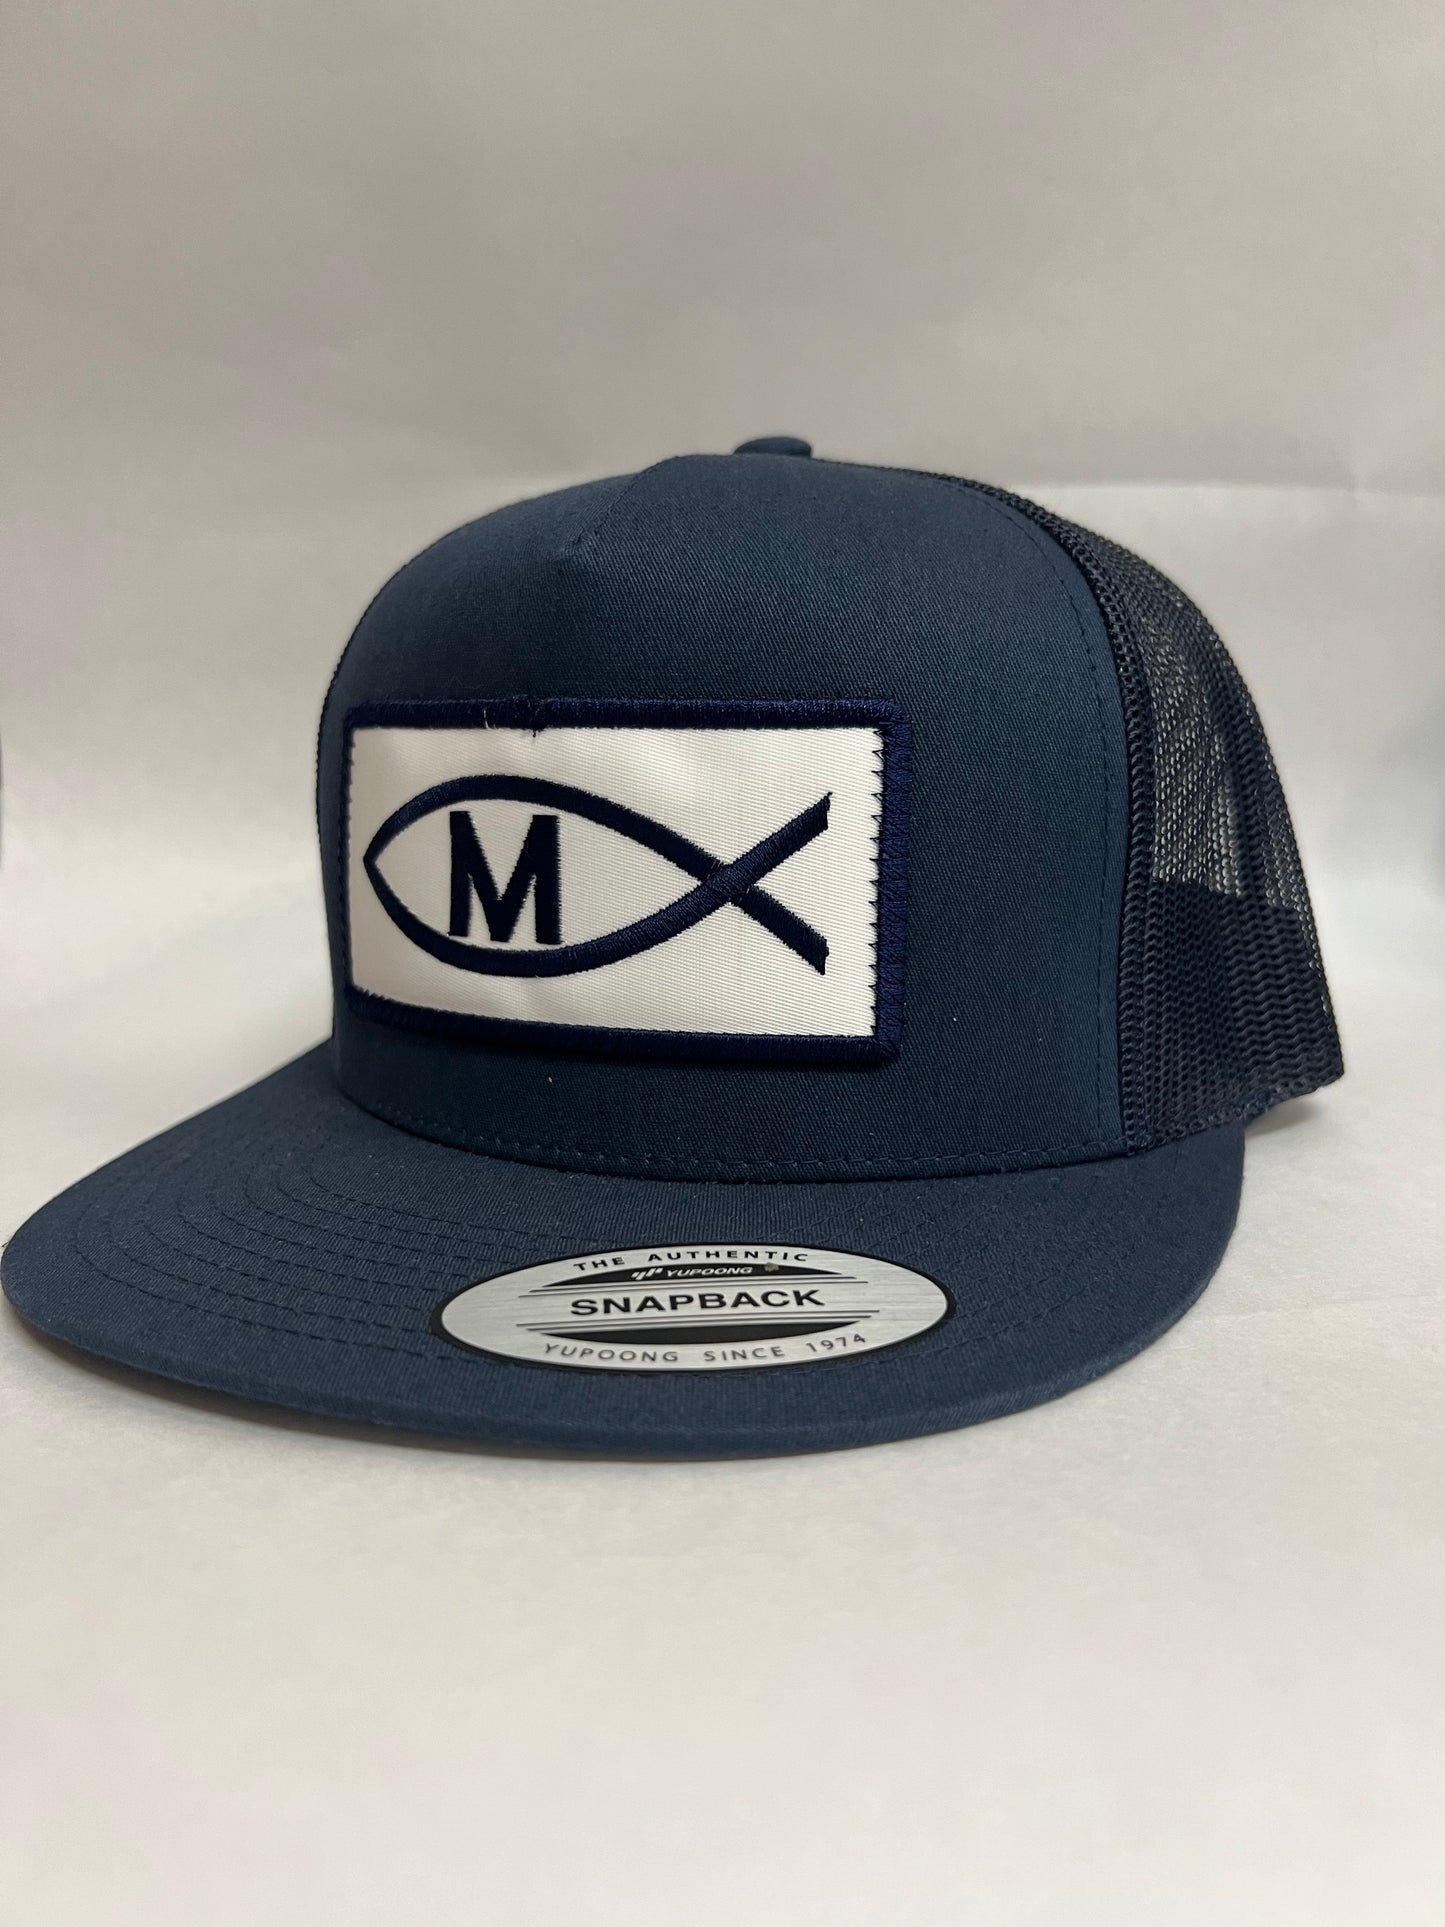 Martinez Patched Navy Hat